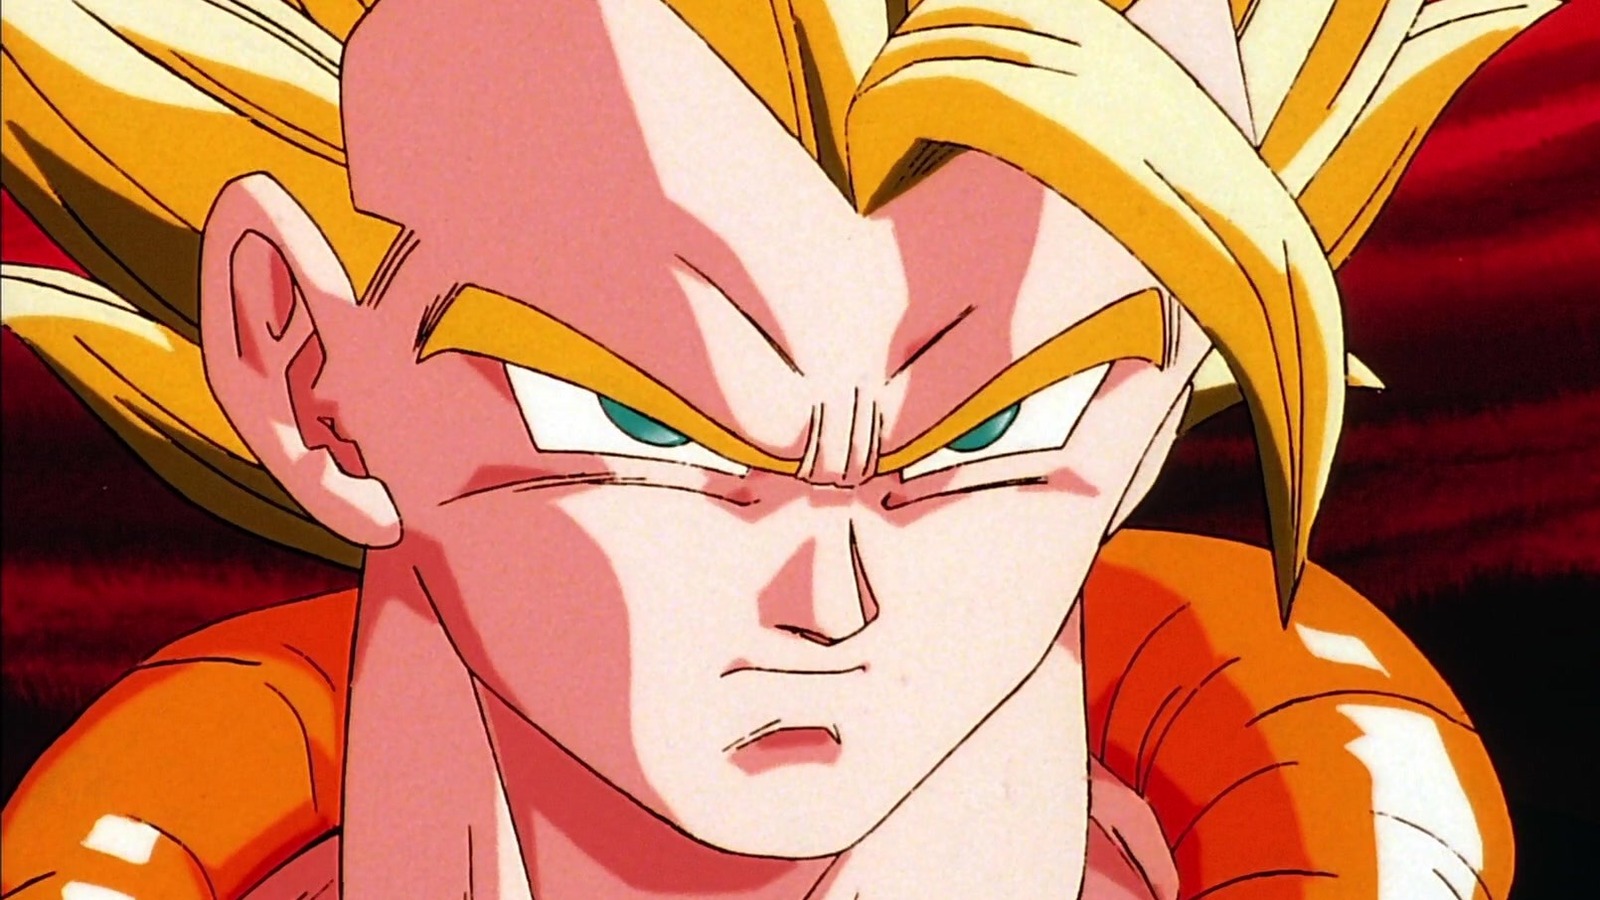 All Dragon Ball Z Sagas, Ranked from Worst to Best